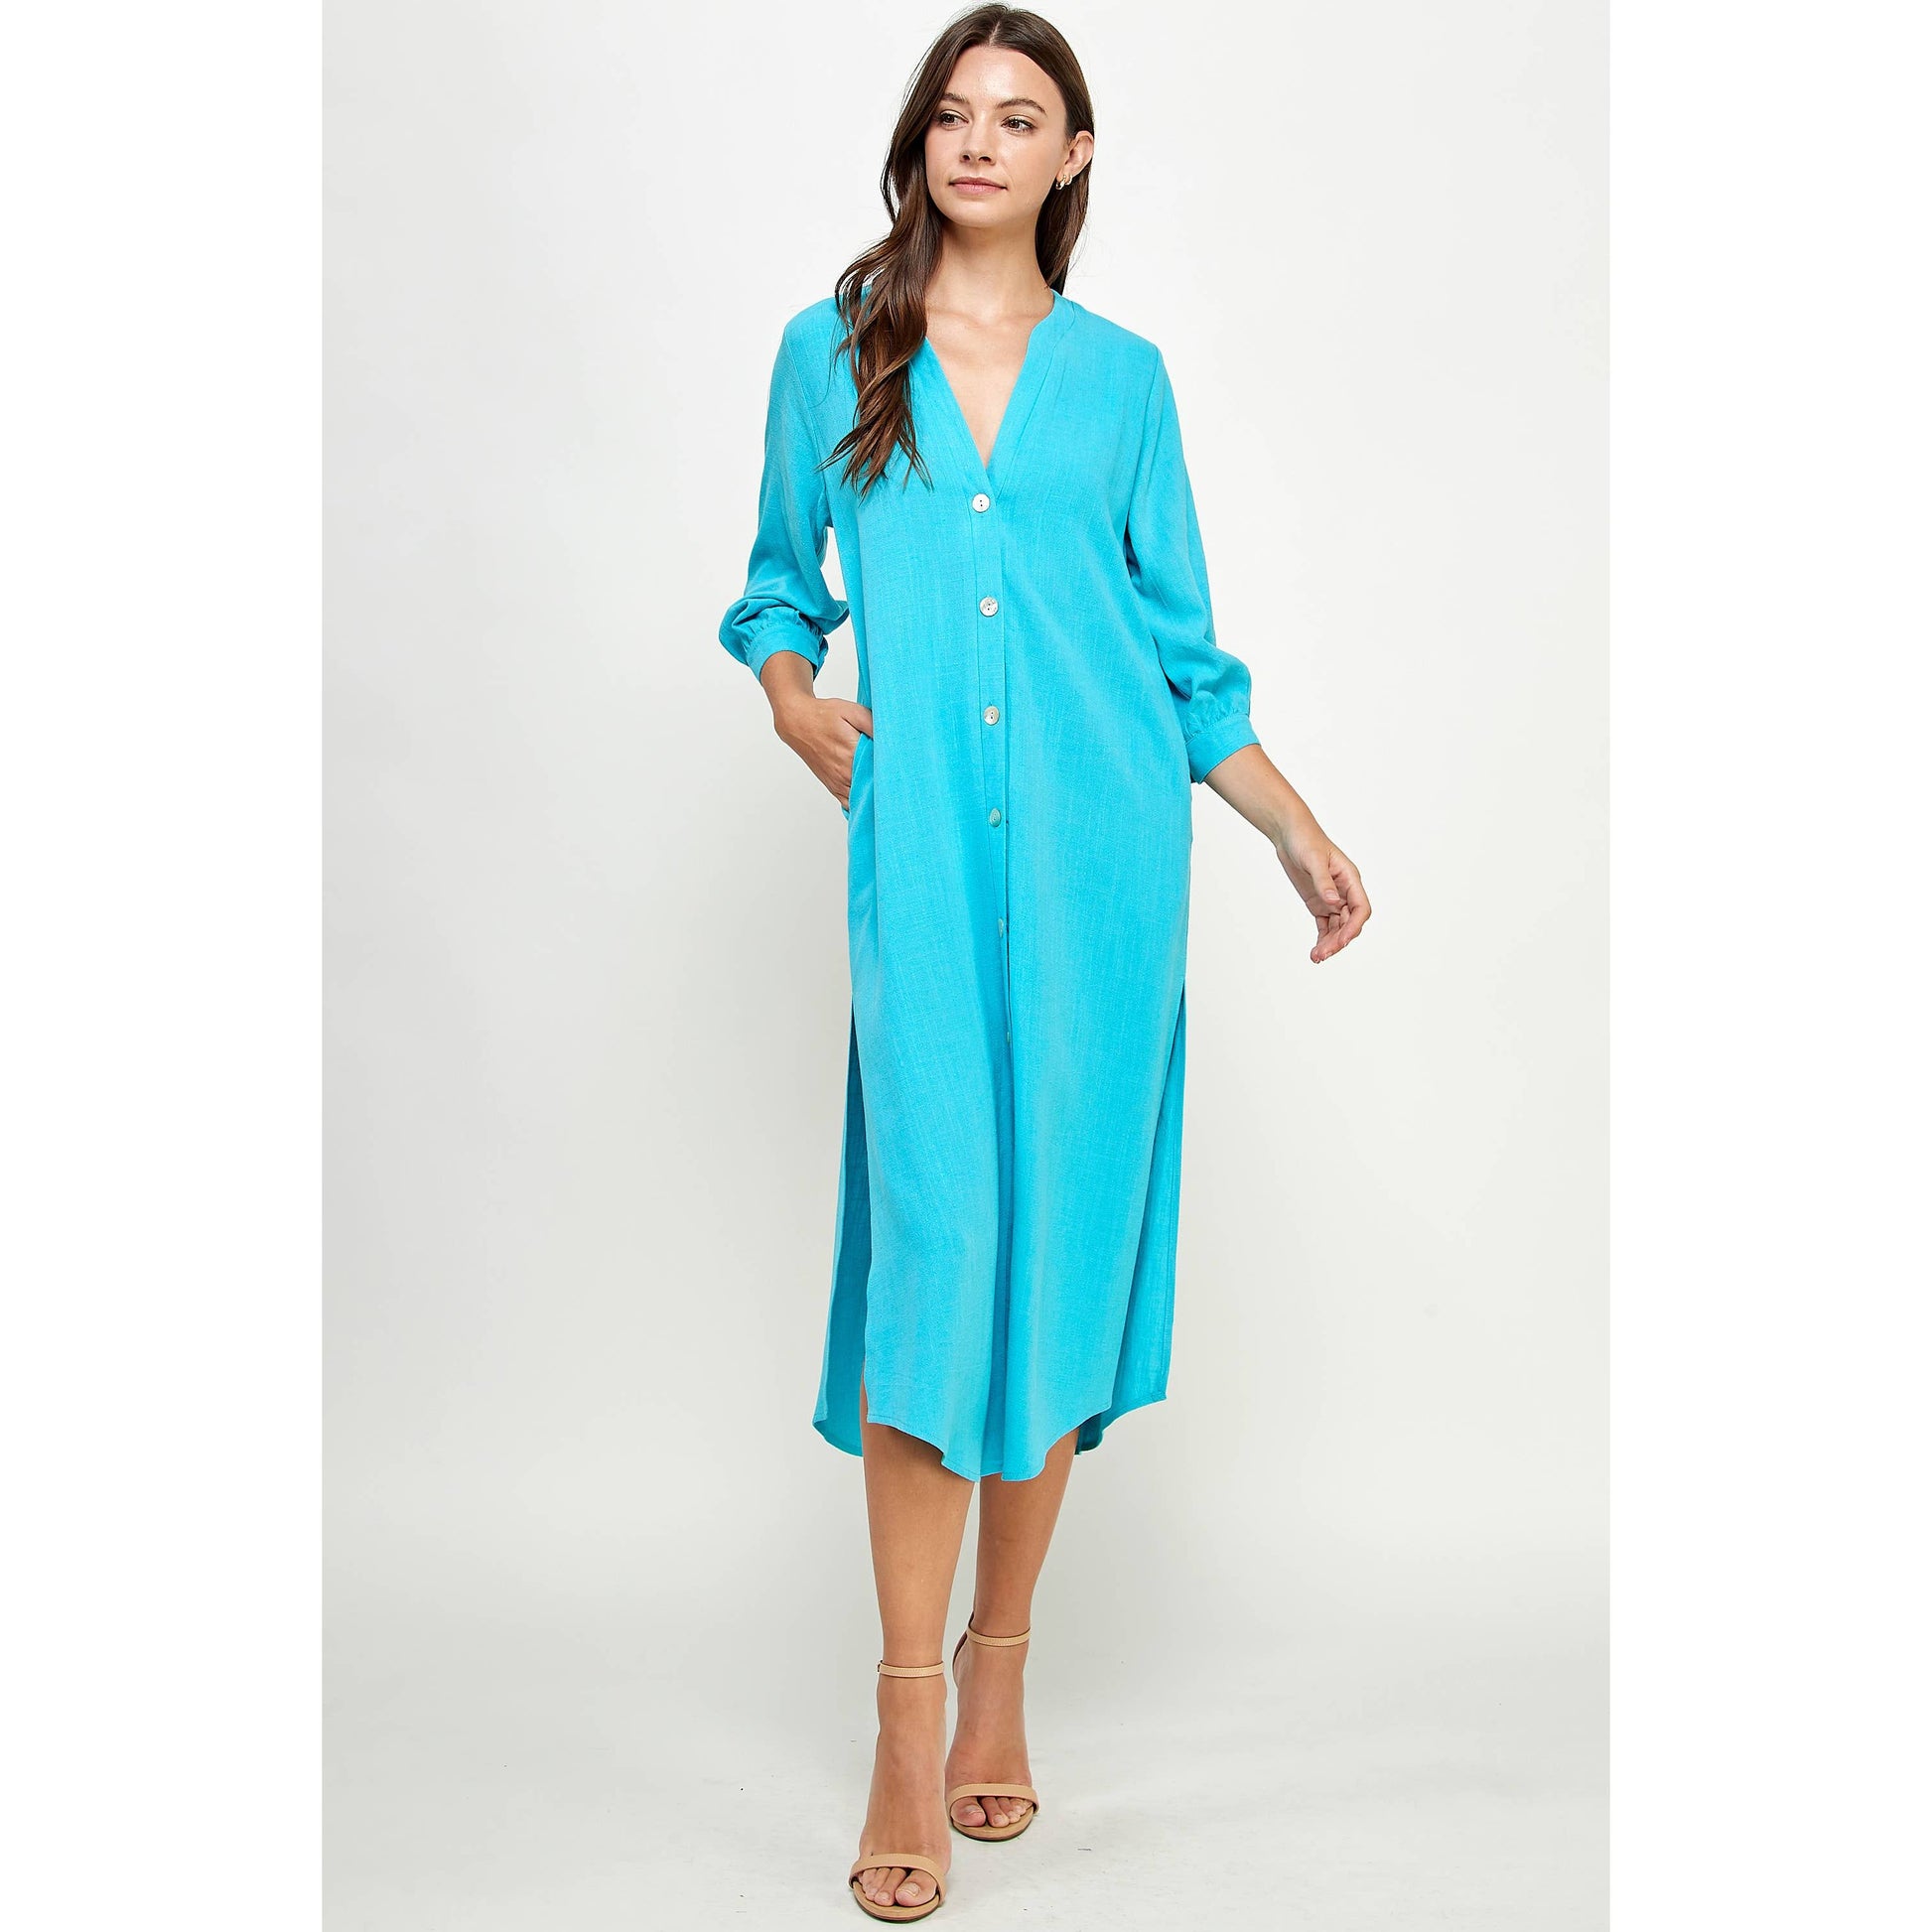 Blue V-Neck Button Down Linen Dress by Ellison Apparel. Available in sizes Small through Large. 70% Viscose, 30% Linen.